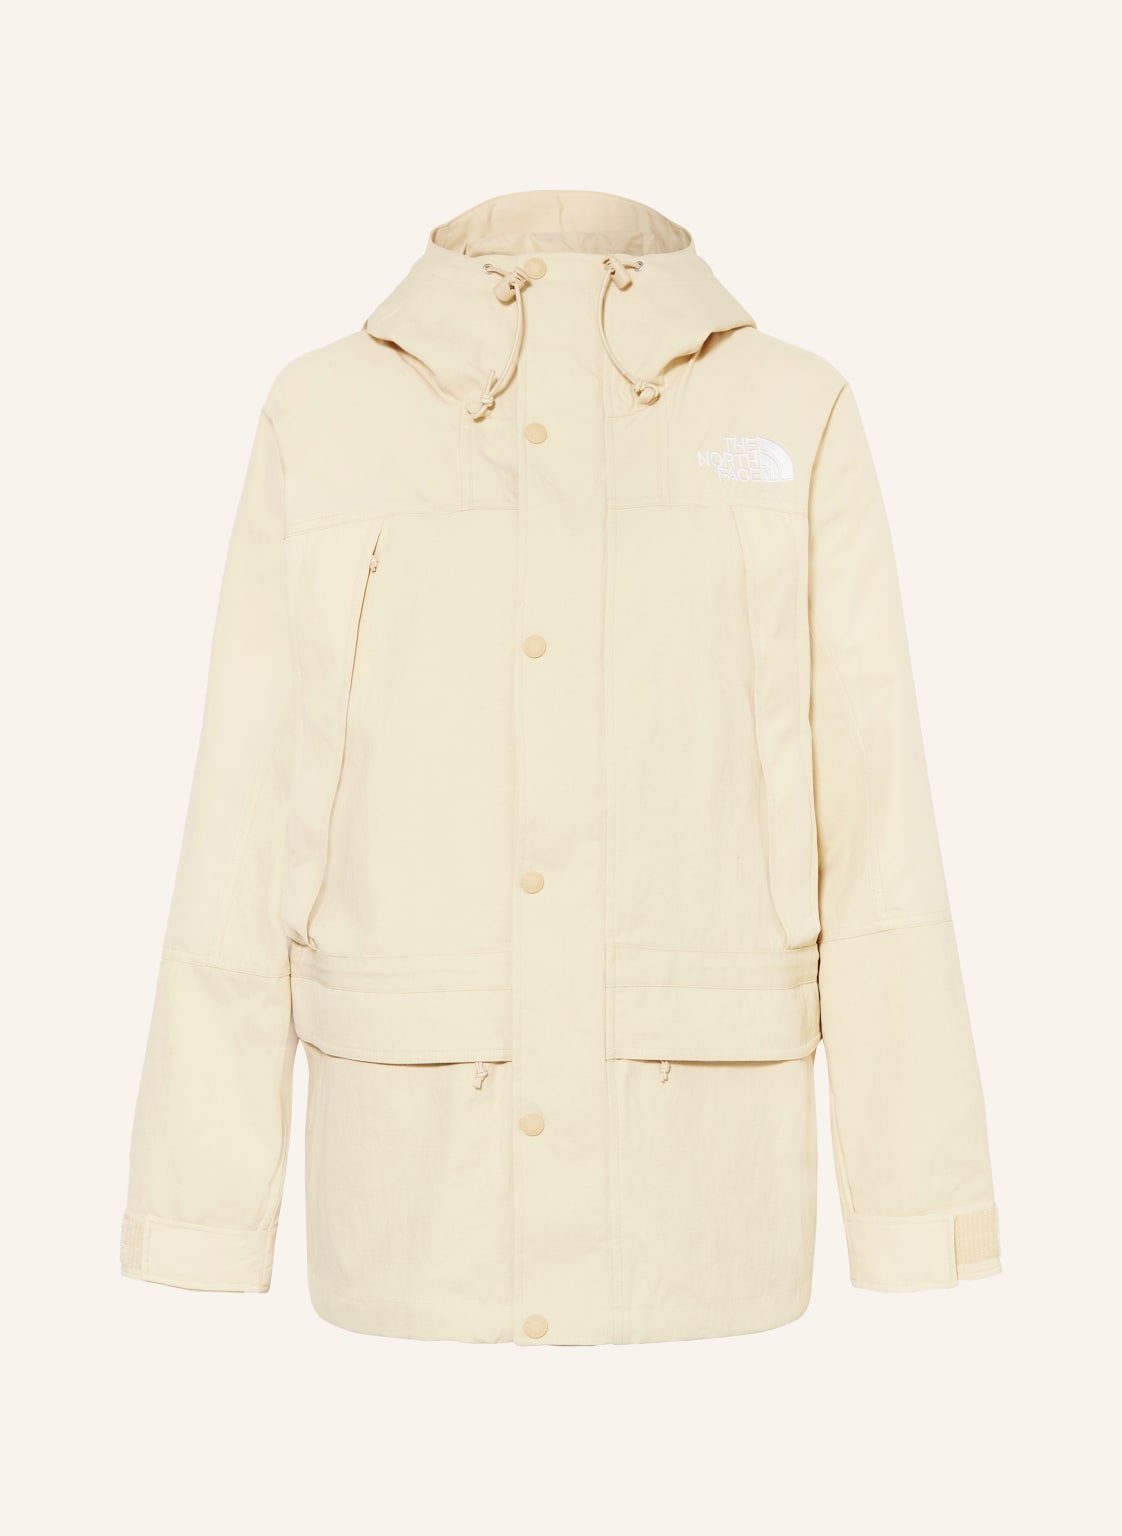 The North Face Jacke Mountain Cargo beige von The North Face